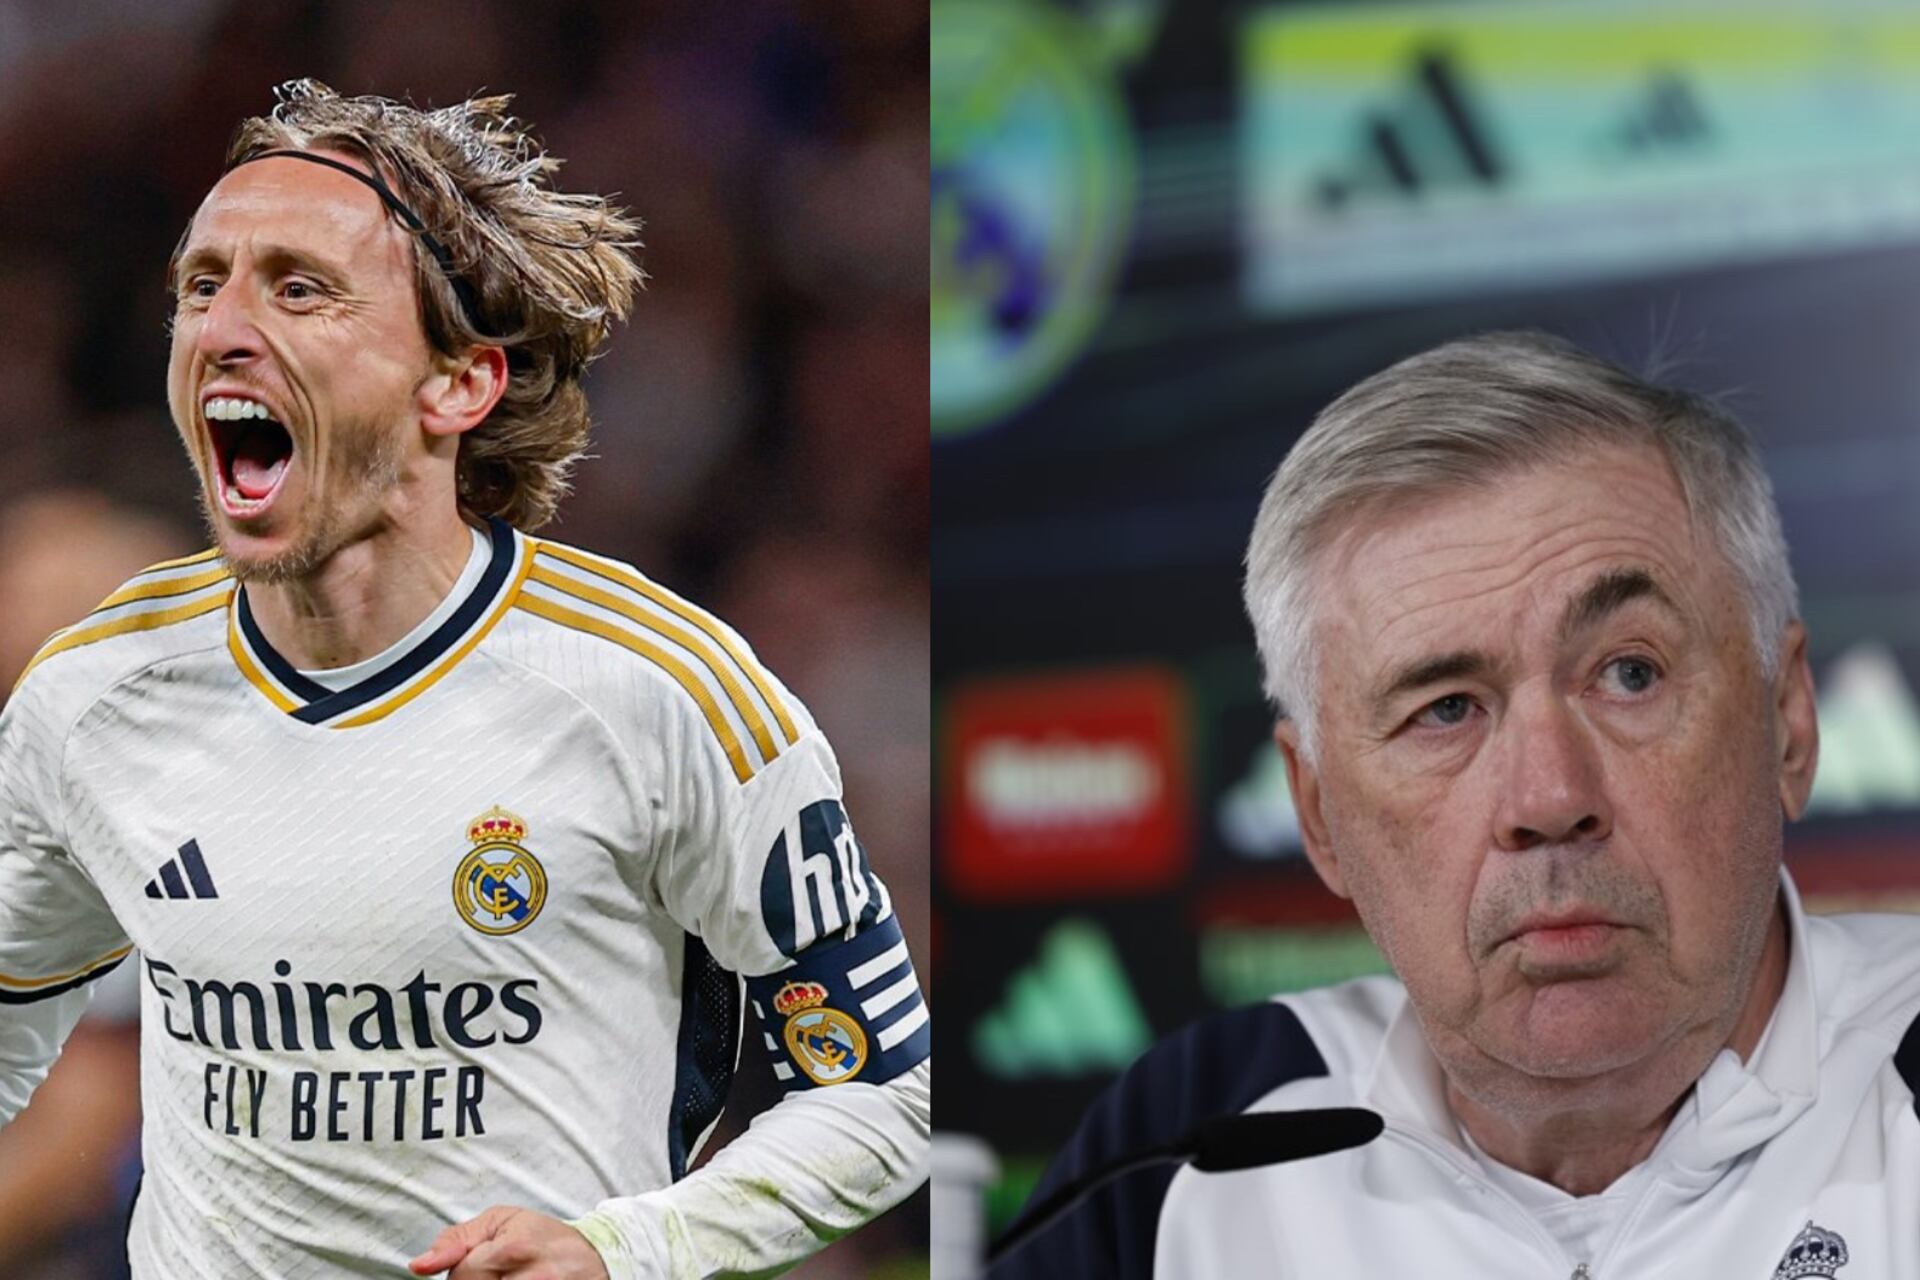 Neither MLS nor Al Nassr, the unexpected destiny of Modric after Real Madrid